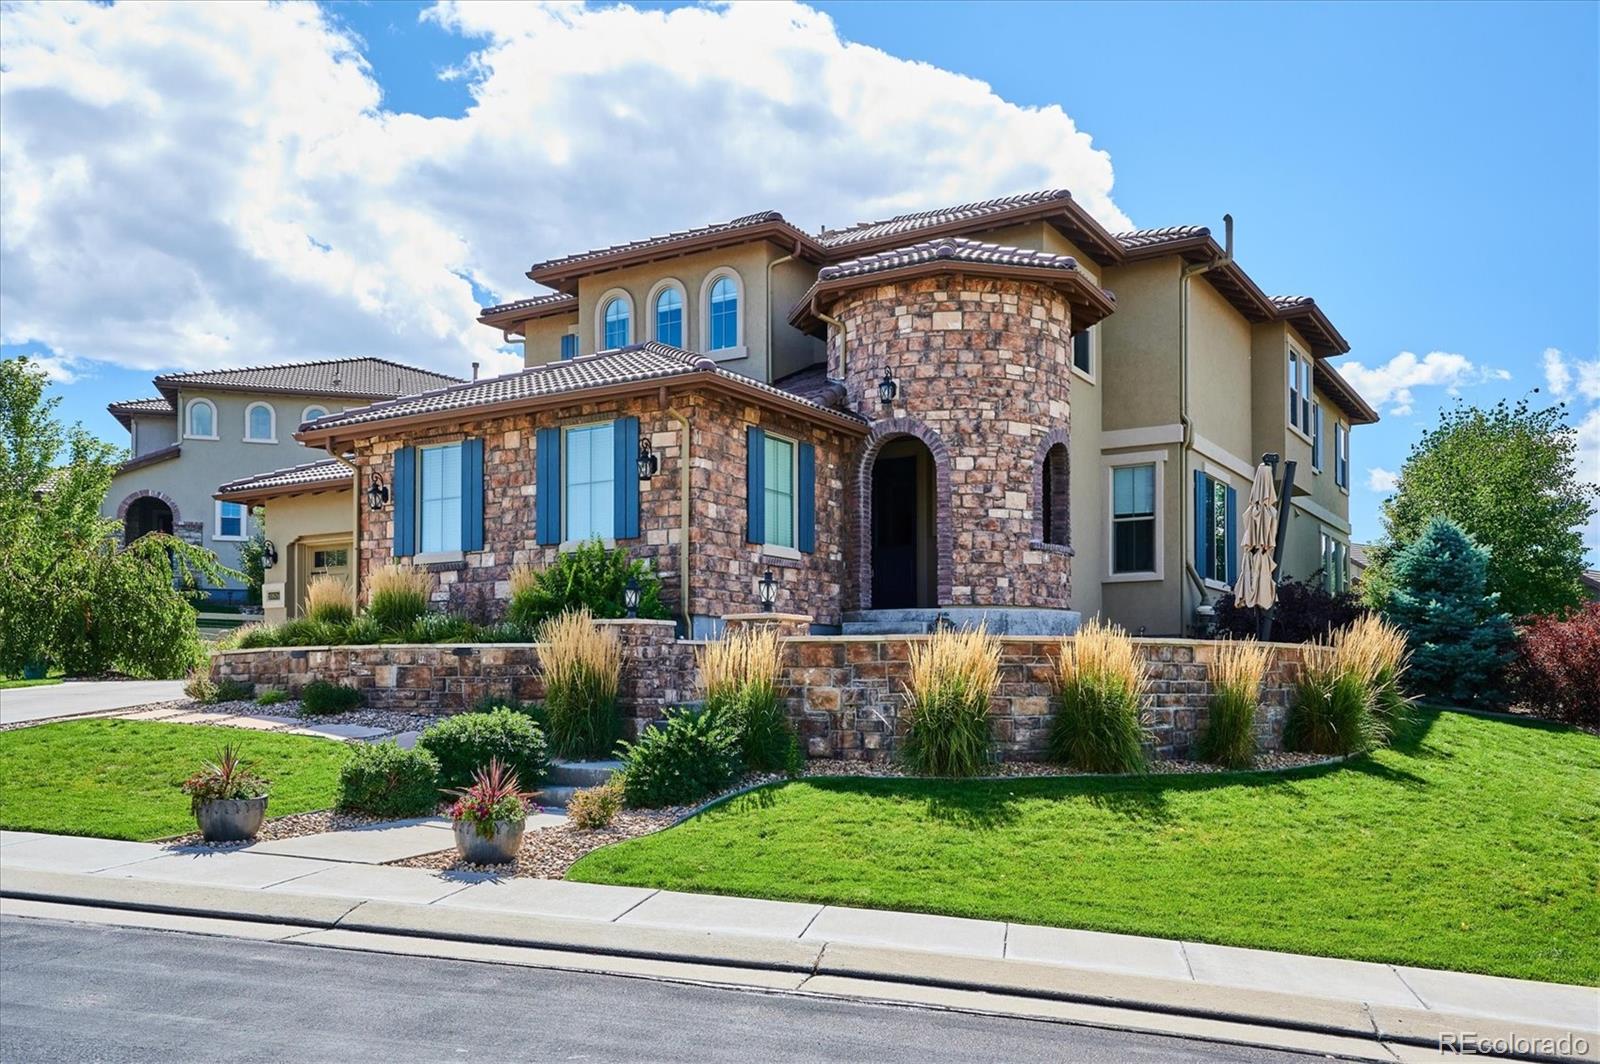 10805  Manorstone Drive, highlands ranch MLS: 3761371 Beds: 5 Baths: 6 Price: $1,849,000